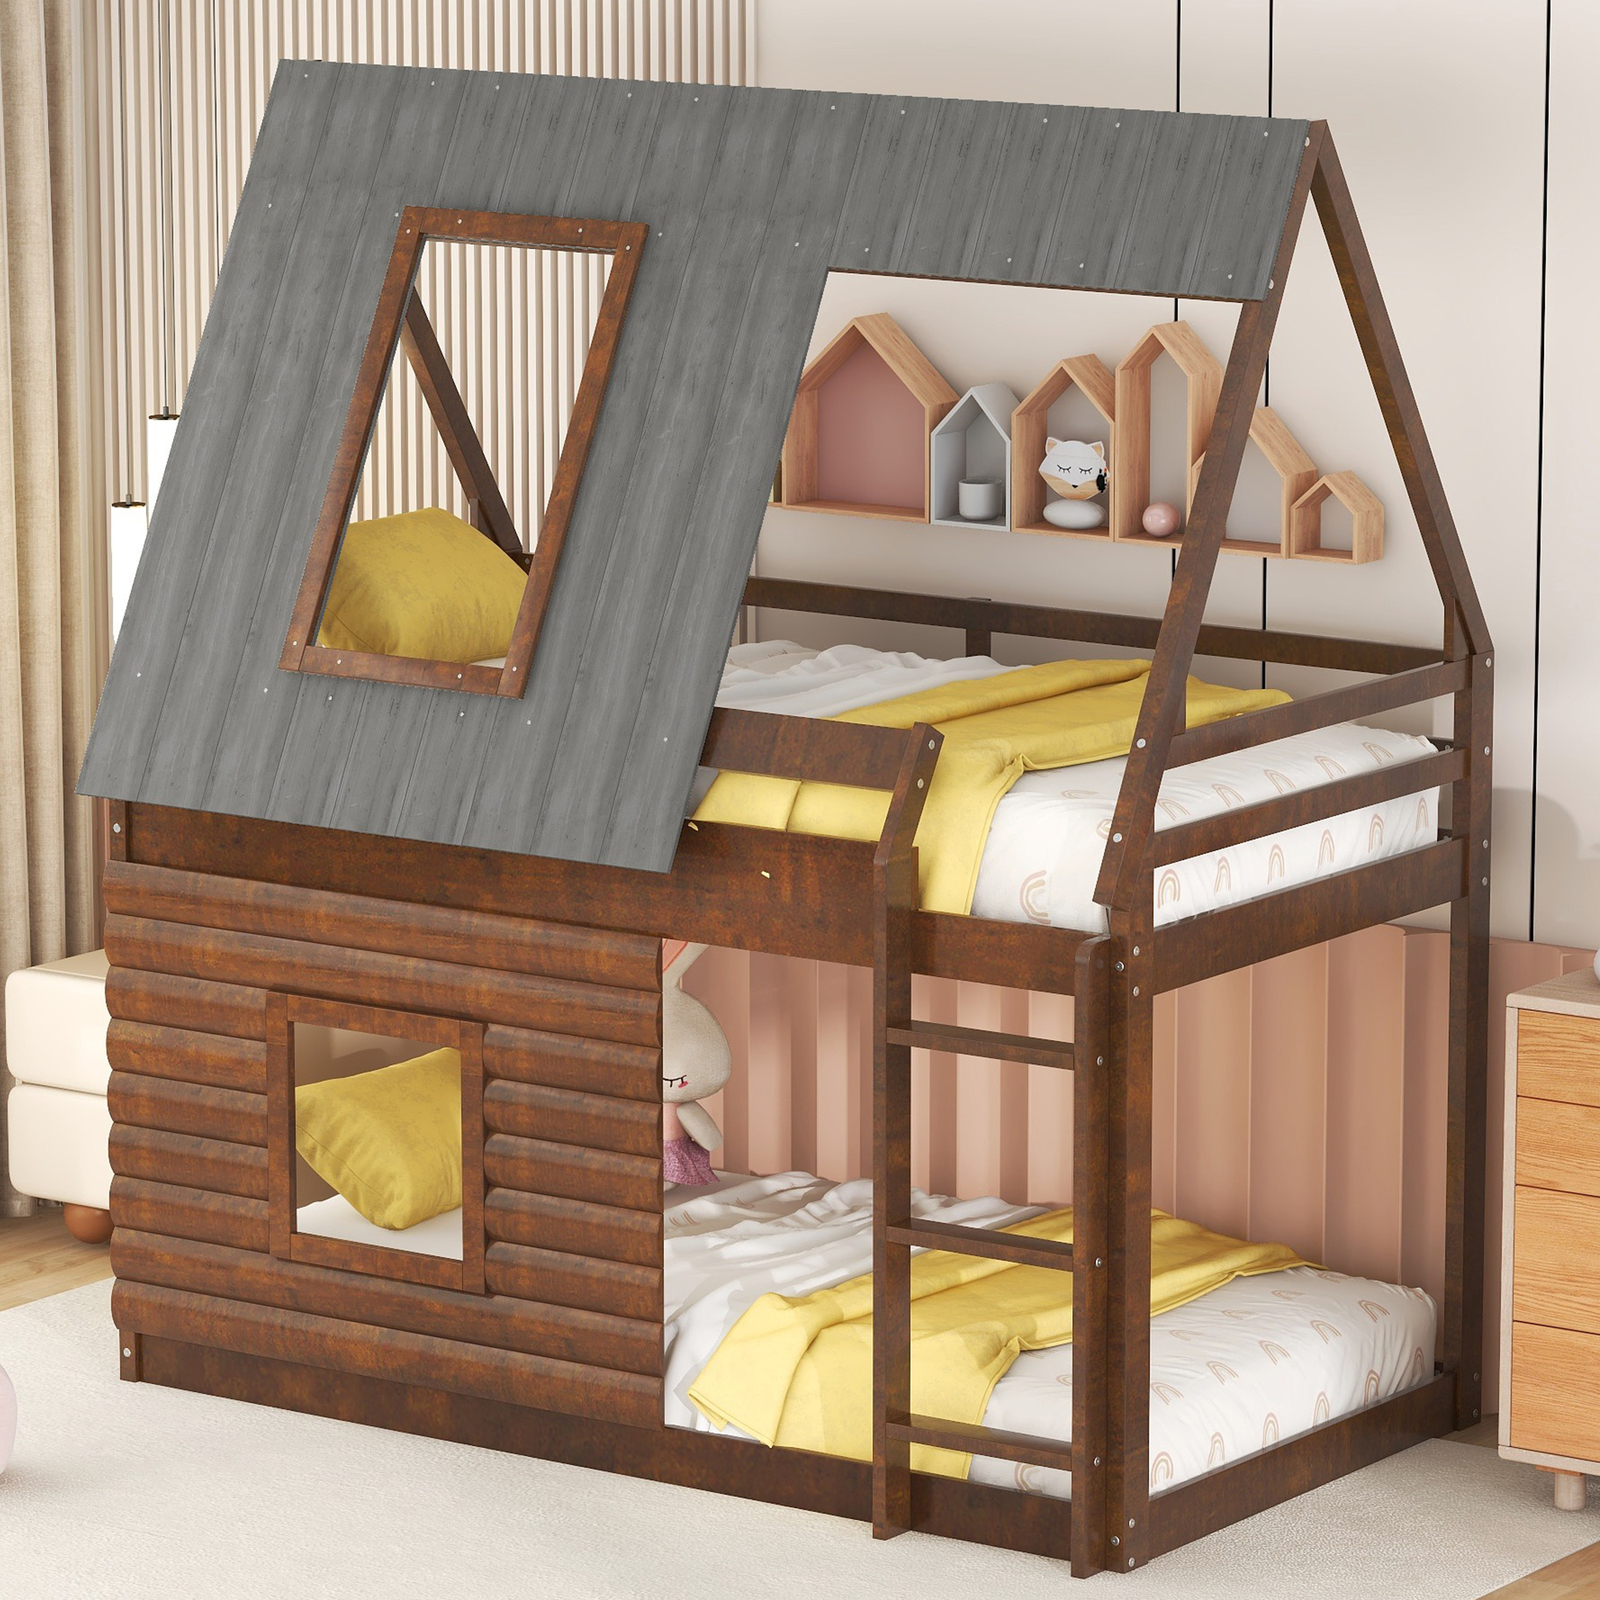 Primary image for Wood Twin Size House Bunk Bed with Roof, Ladder and 2 Windows, Oak & Smoky Grey